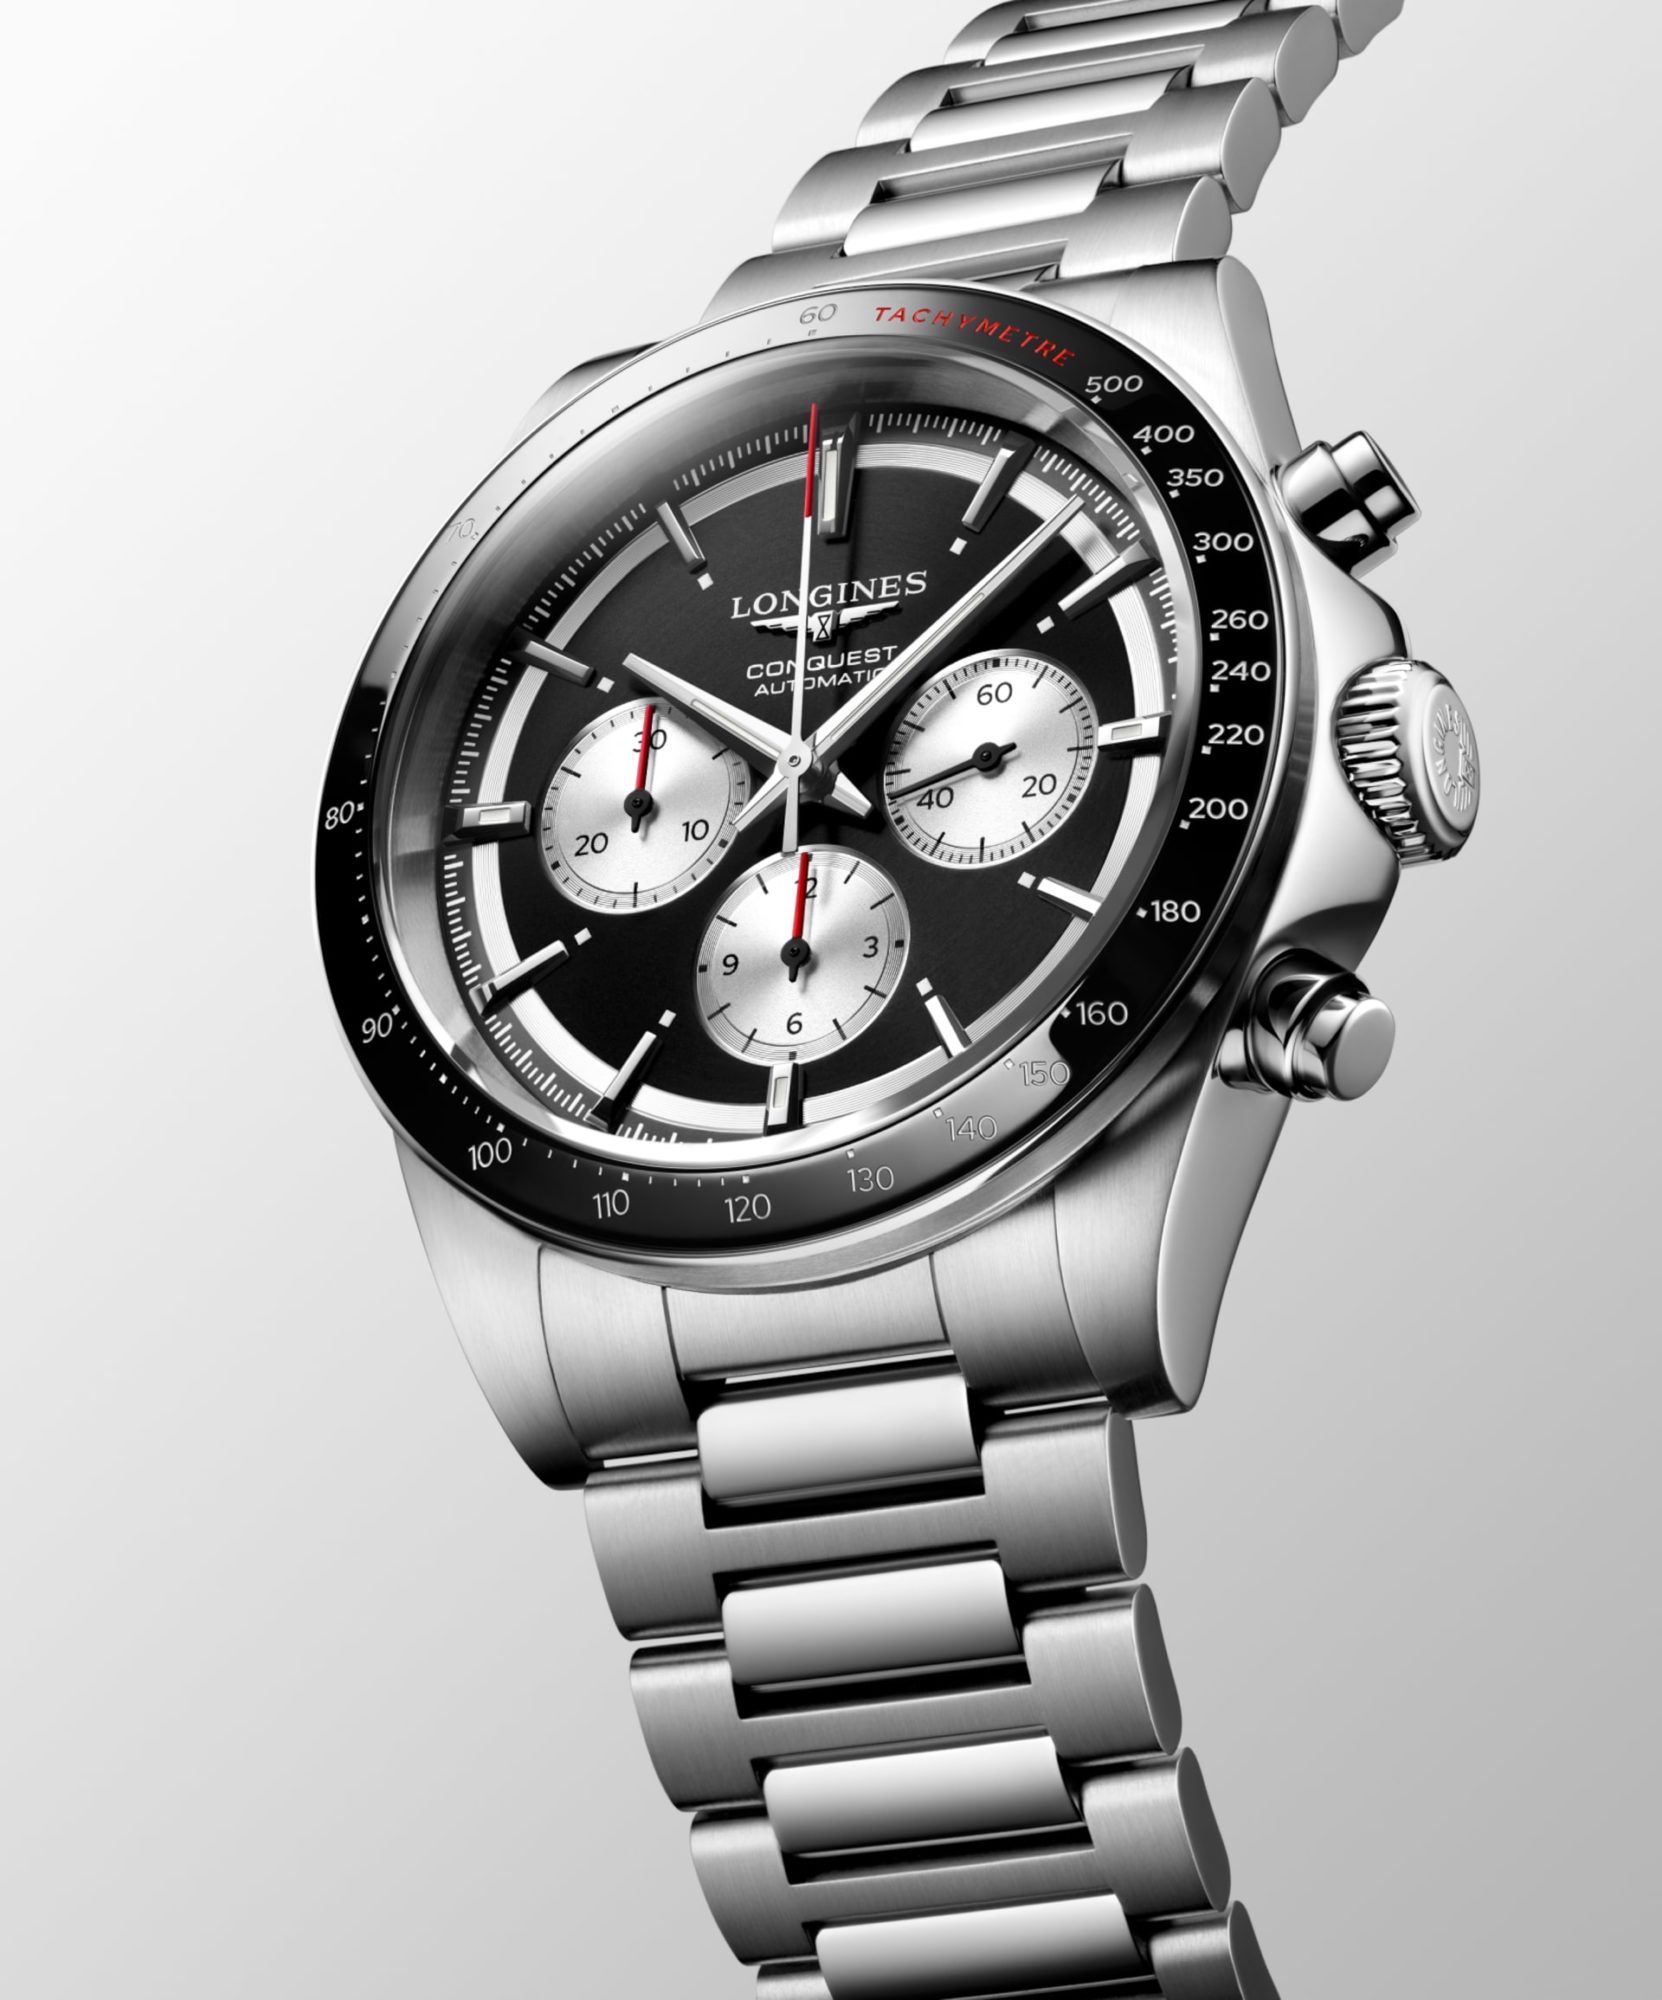 LONGINES CONQUEST AUTOMATIC 42 MM STAINLESS STEEL AND CERAMIC BLACK